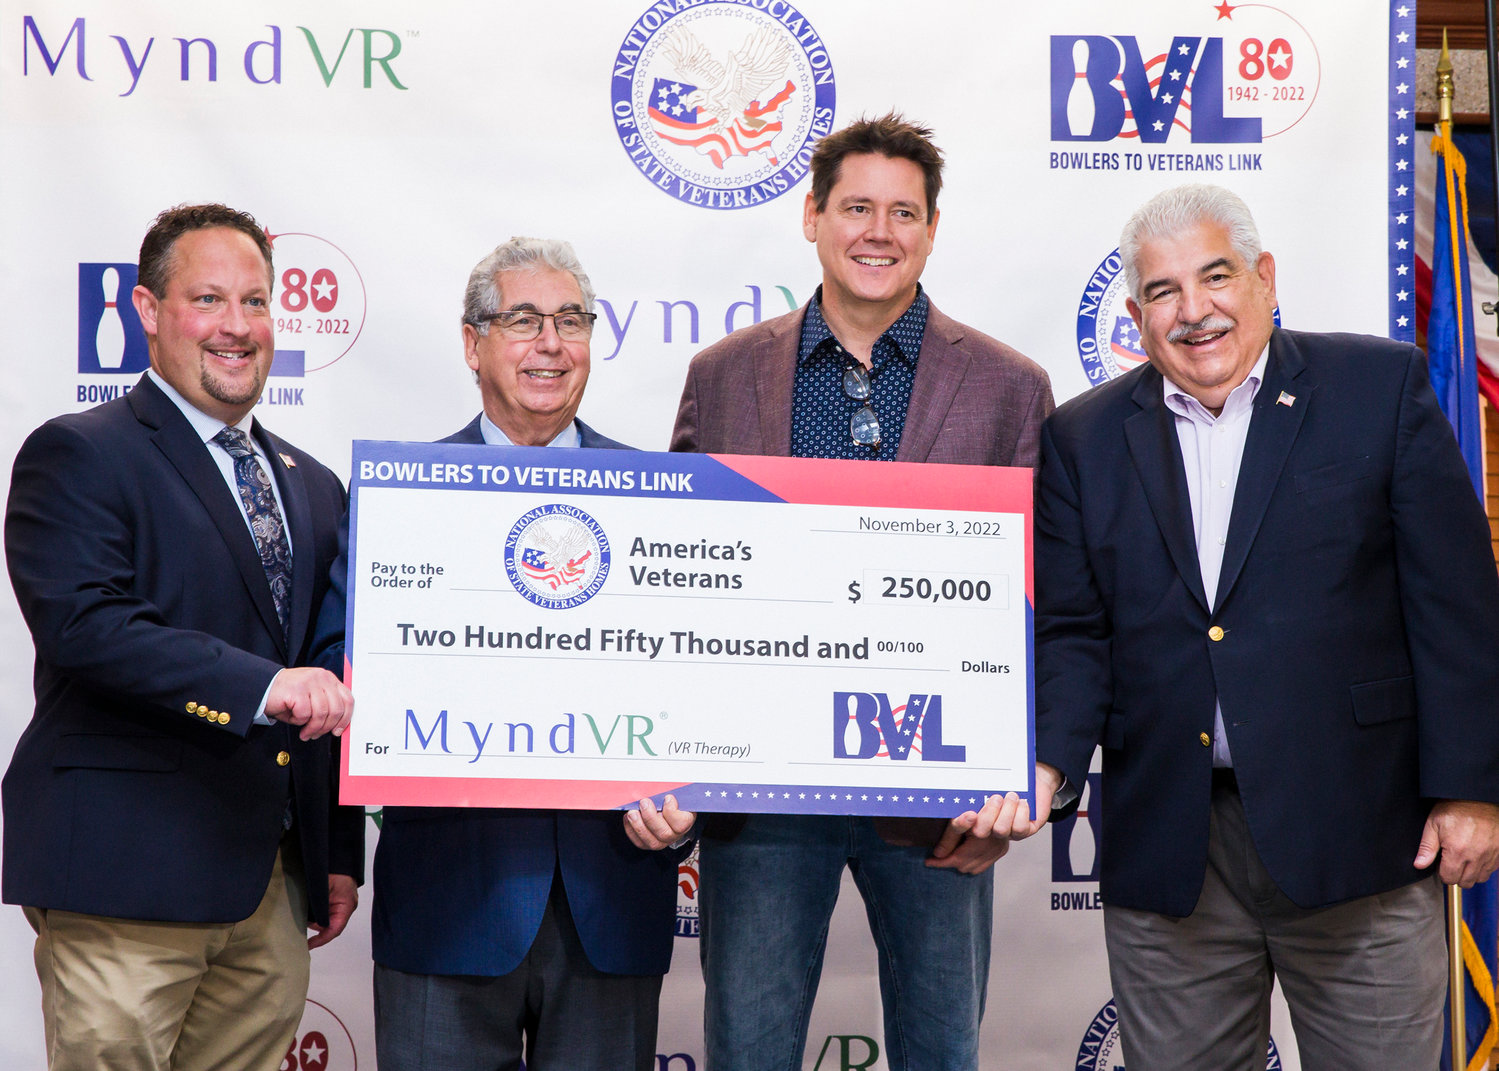 Bowlers to Veterans Link presents a $250,000 check to the National Association of State Veterans Homes to fund virtual reality therapy programs for veterans. From left: Jonathan Spier, deputy executive director of Long Island State Veterans Home, John LaSpina, president of Maple Family Centers and Bowlers to Veterans Link board chairman, Chris Brickler, MyndVR founder and CEO, and Fred Sganga, executive director of Long Island State Veterans Home.